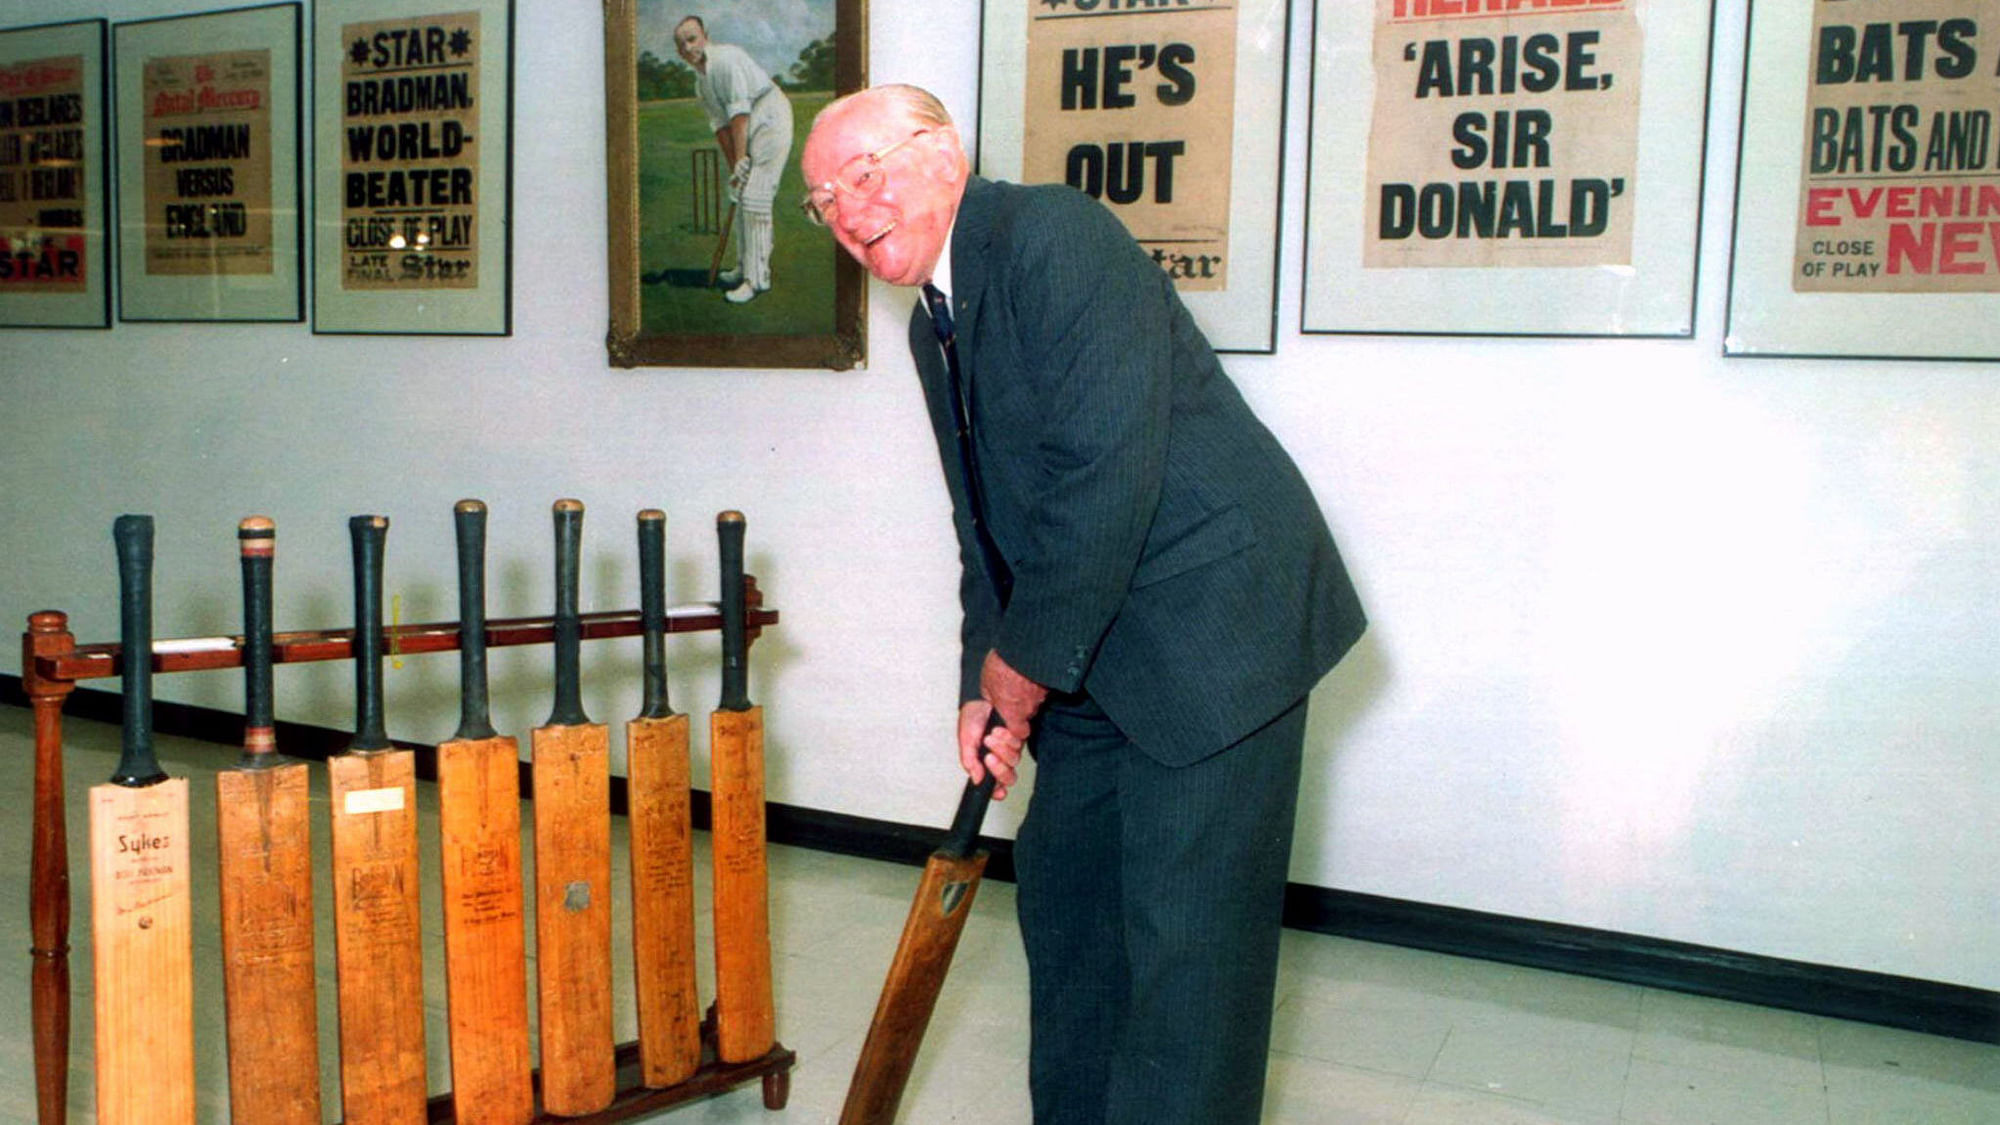 Sir Donald Bradman holds one of his old cricket bats at the opening of the Bradman Collection in Adelaide’s State Library in August, 1998.